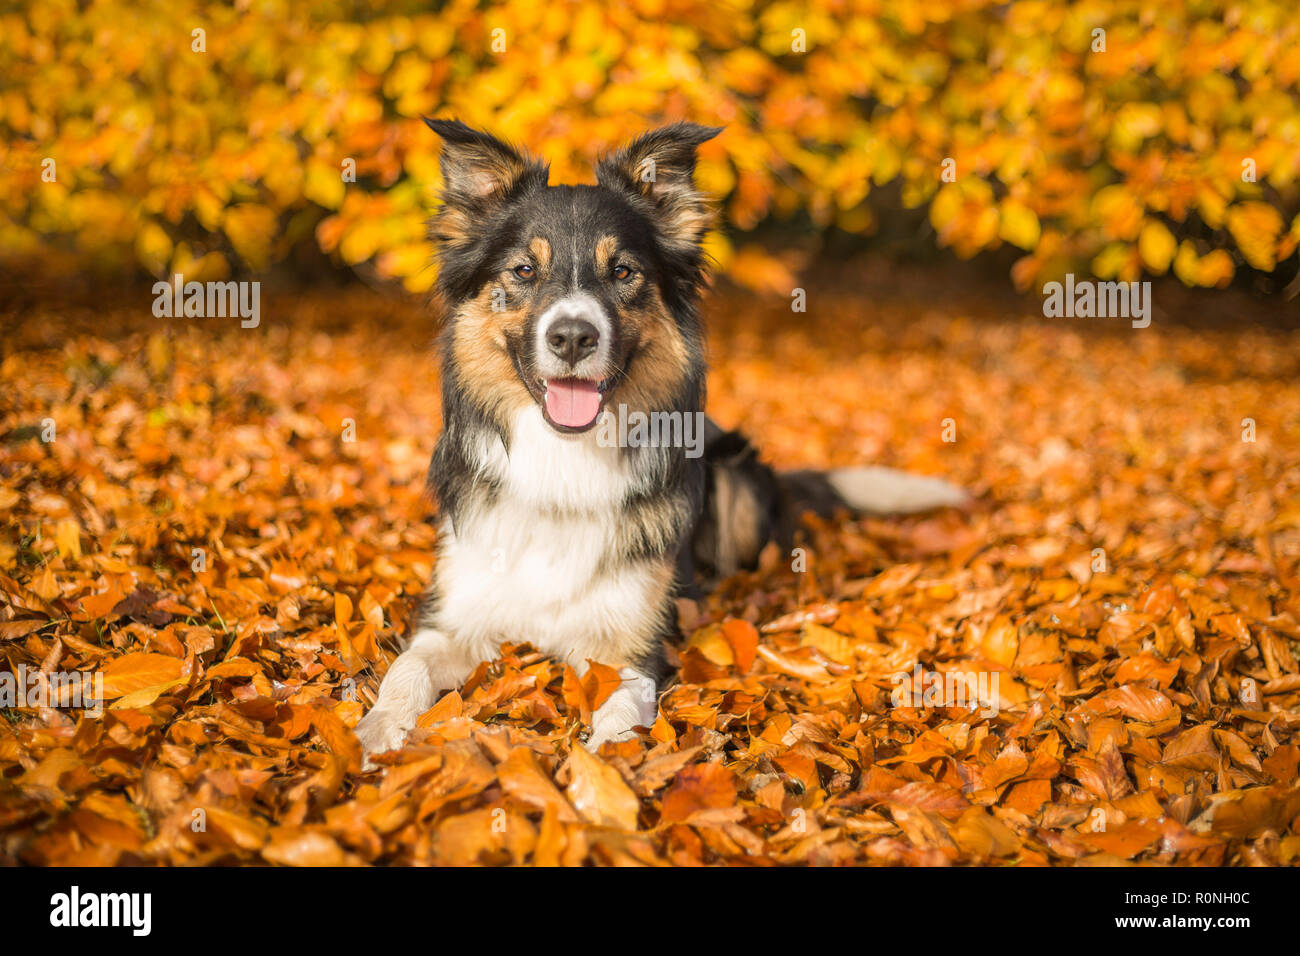 A portrait of a tri-coloured border collie lying on a bed of autumn leaves. Stock Photo